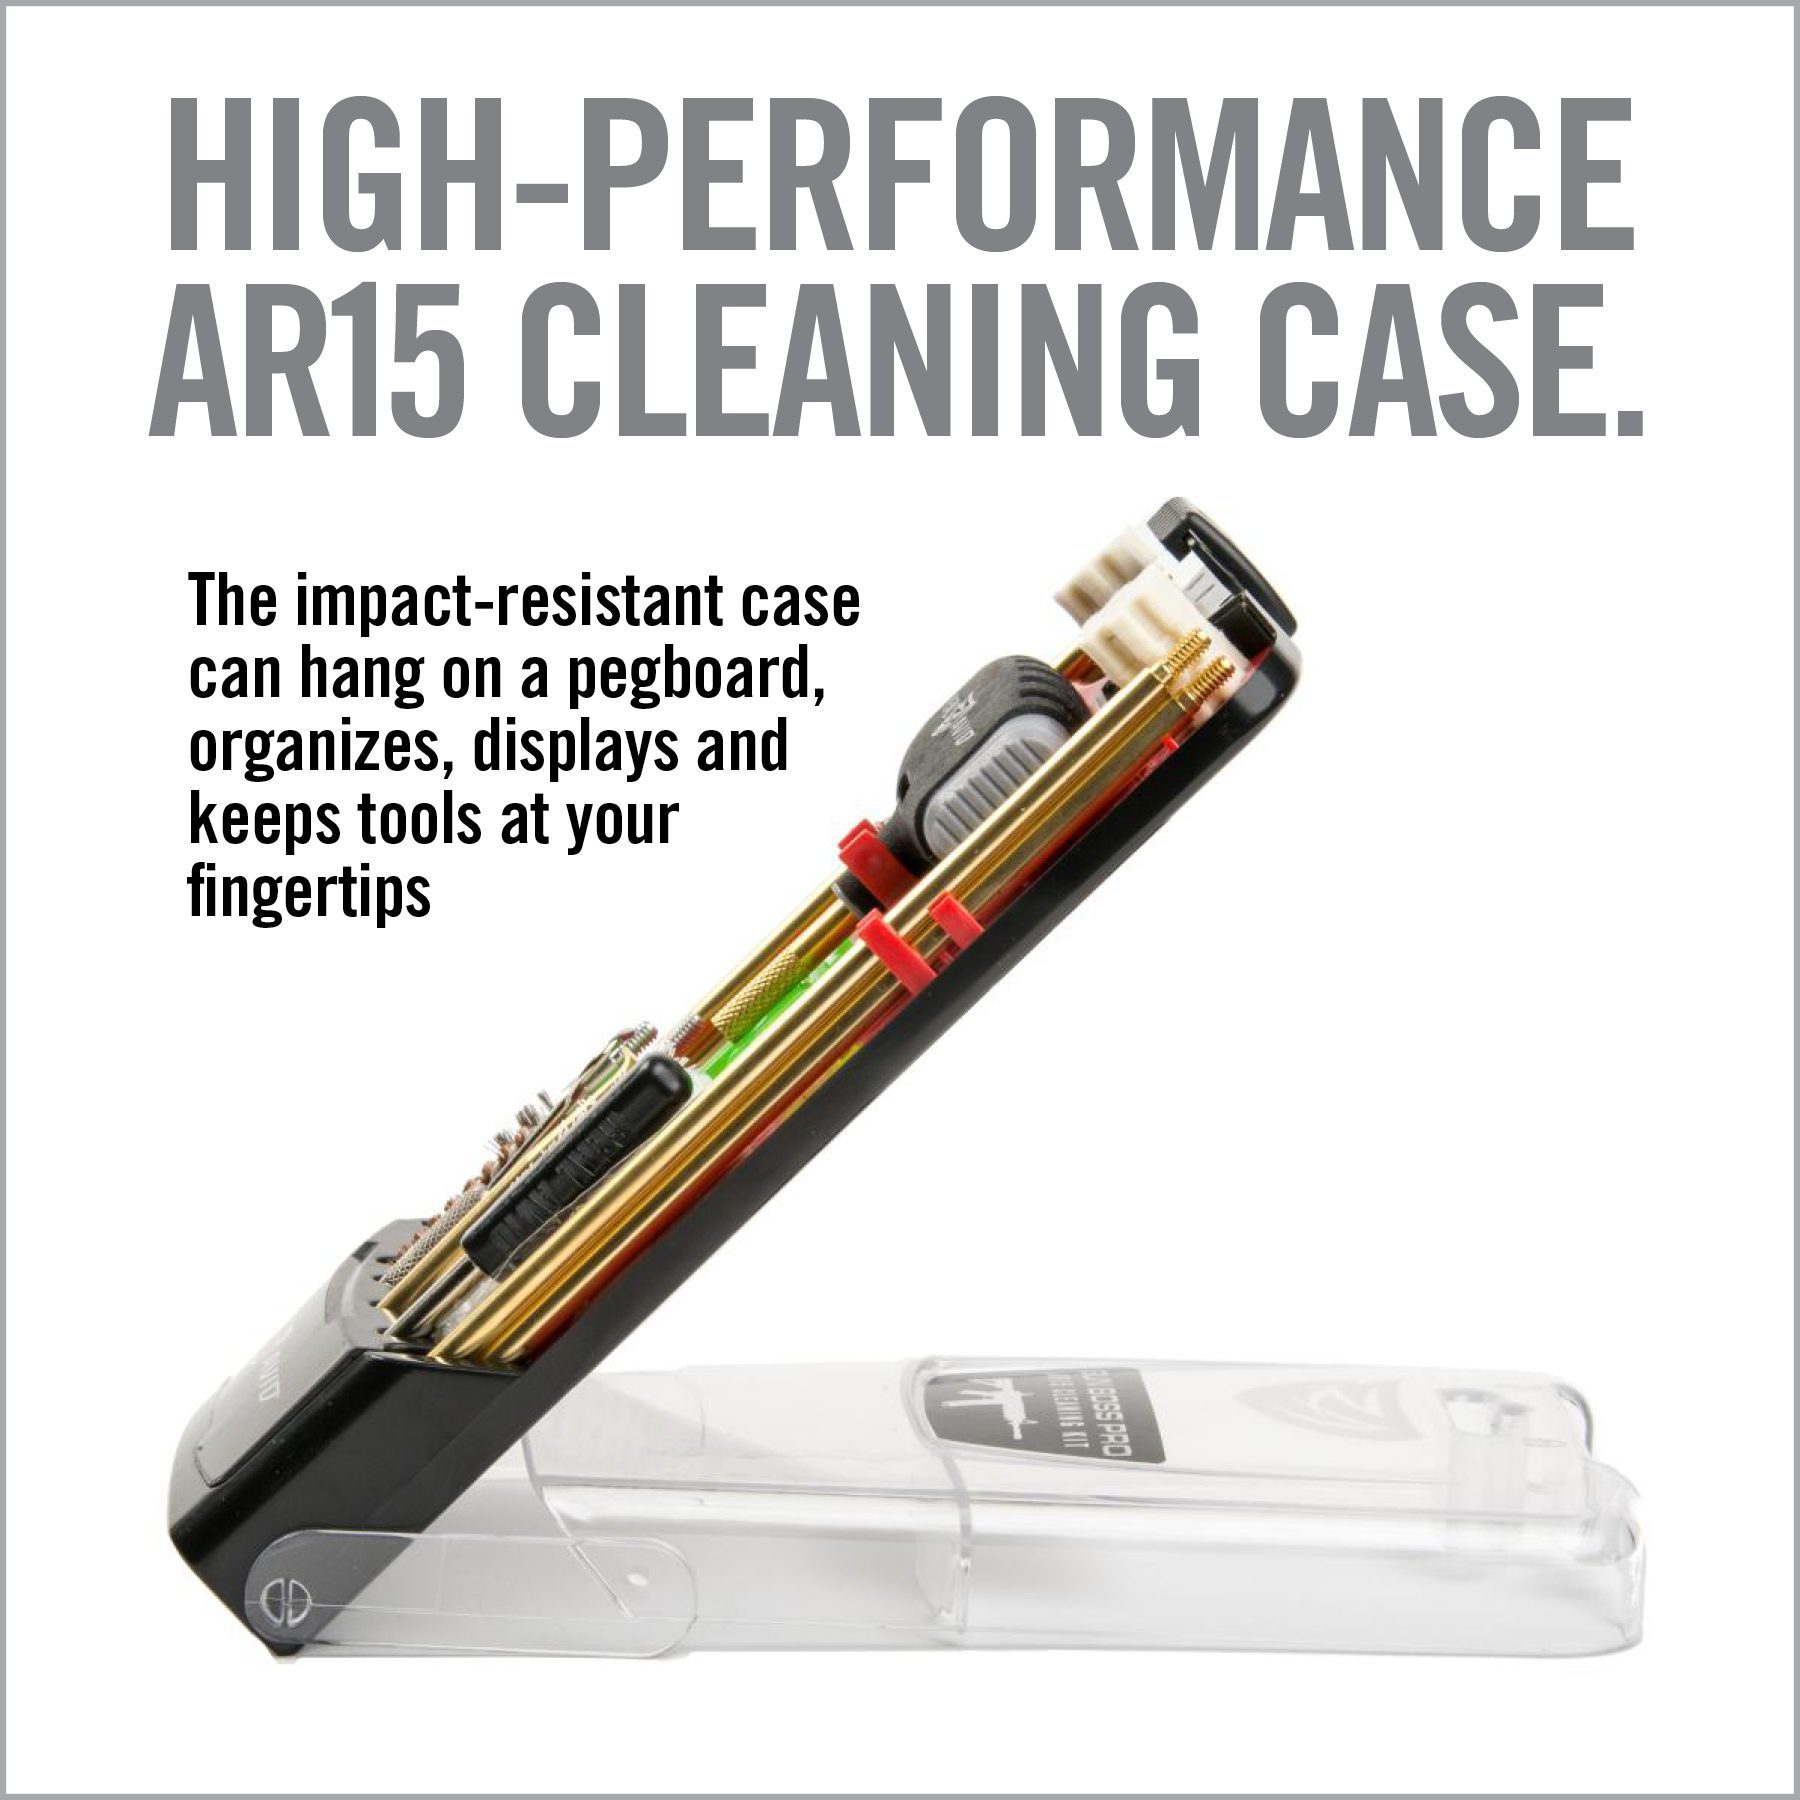 an advertisement for high - performance art cleaning case